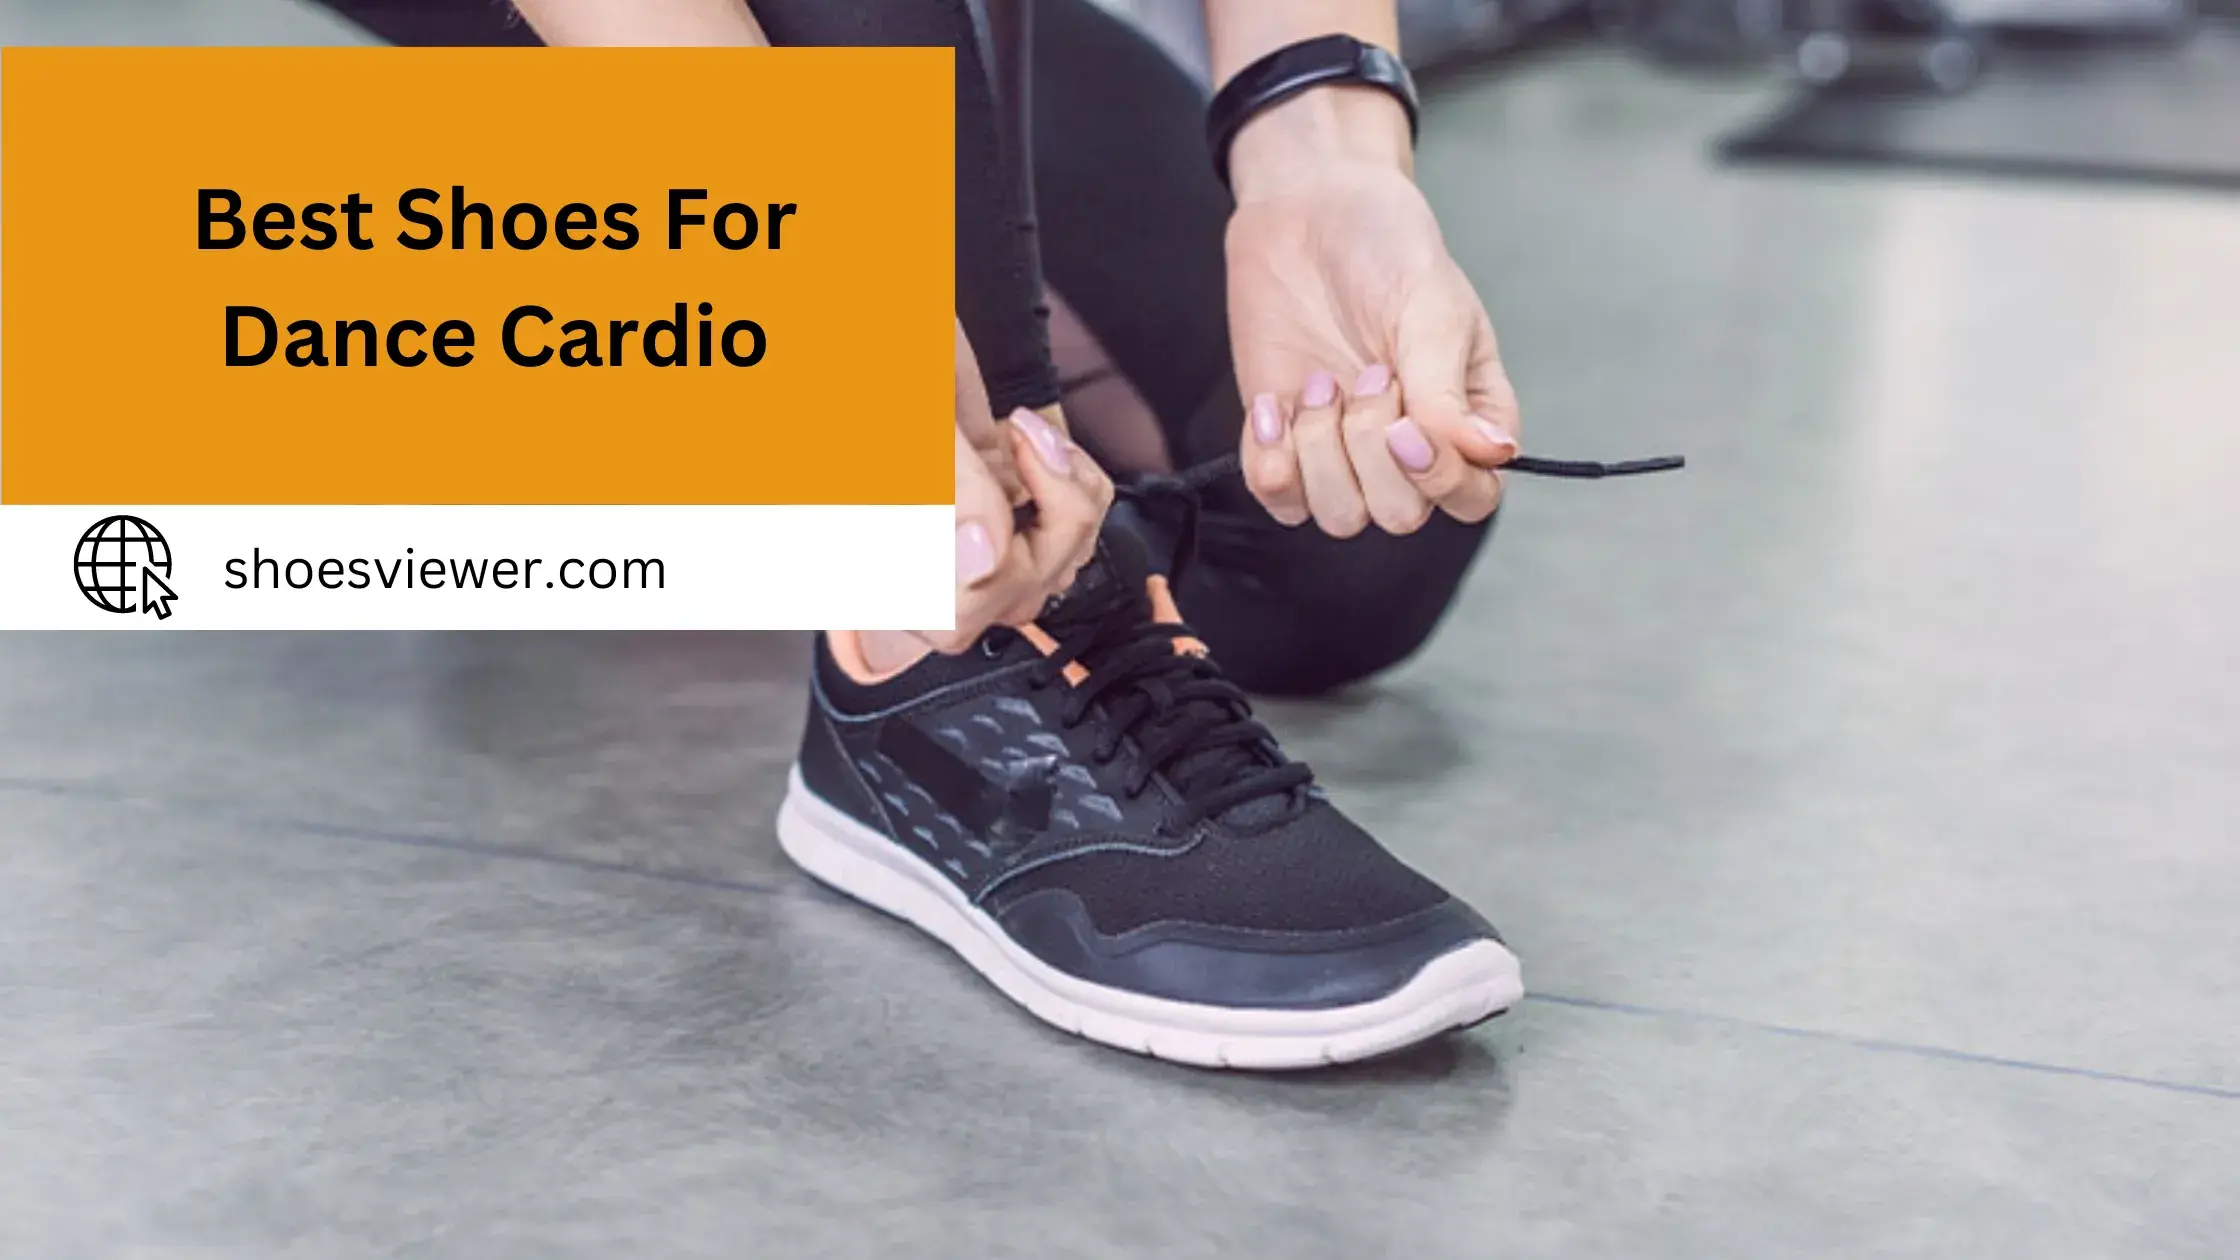 Best Shoes For Dance Cardio - (An In-Depth Guide)